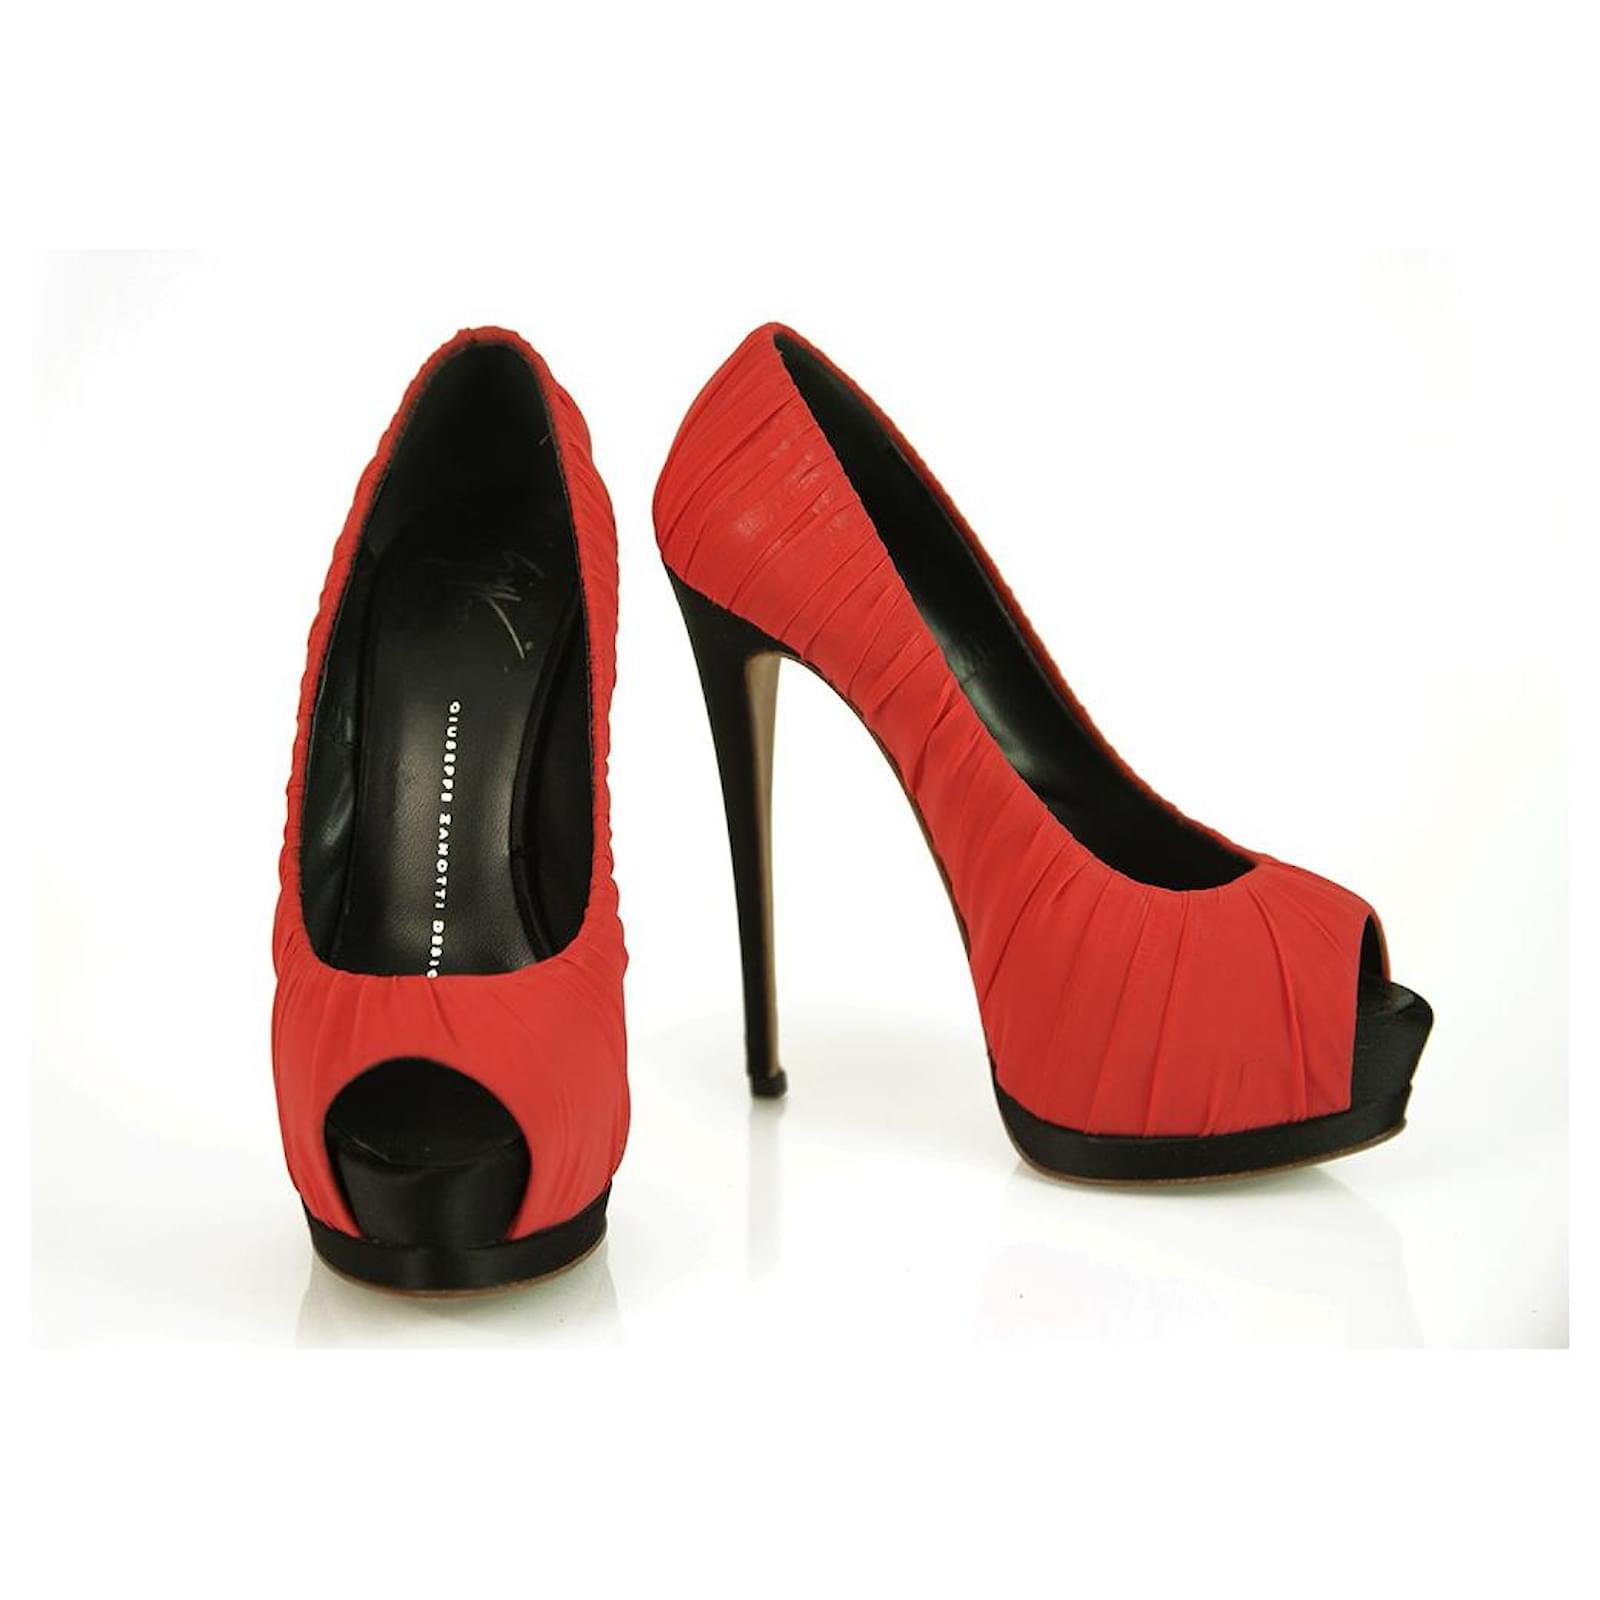 shoes, black pumps, red pumps, black and red heels, high heels